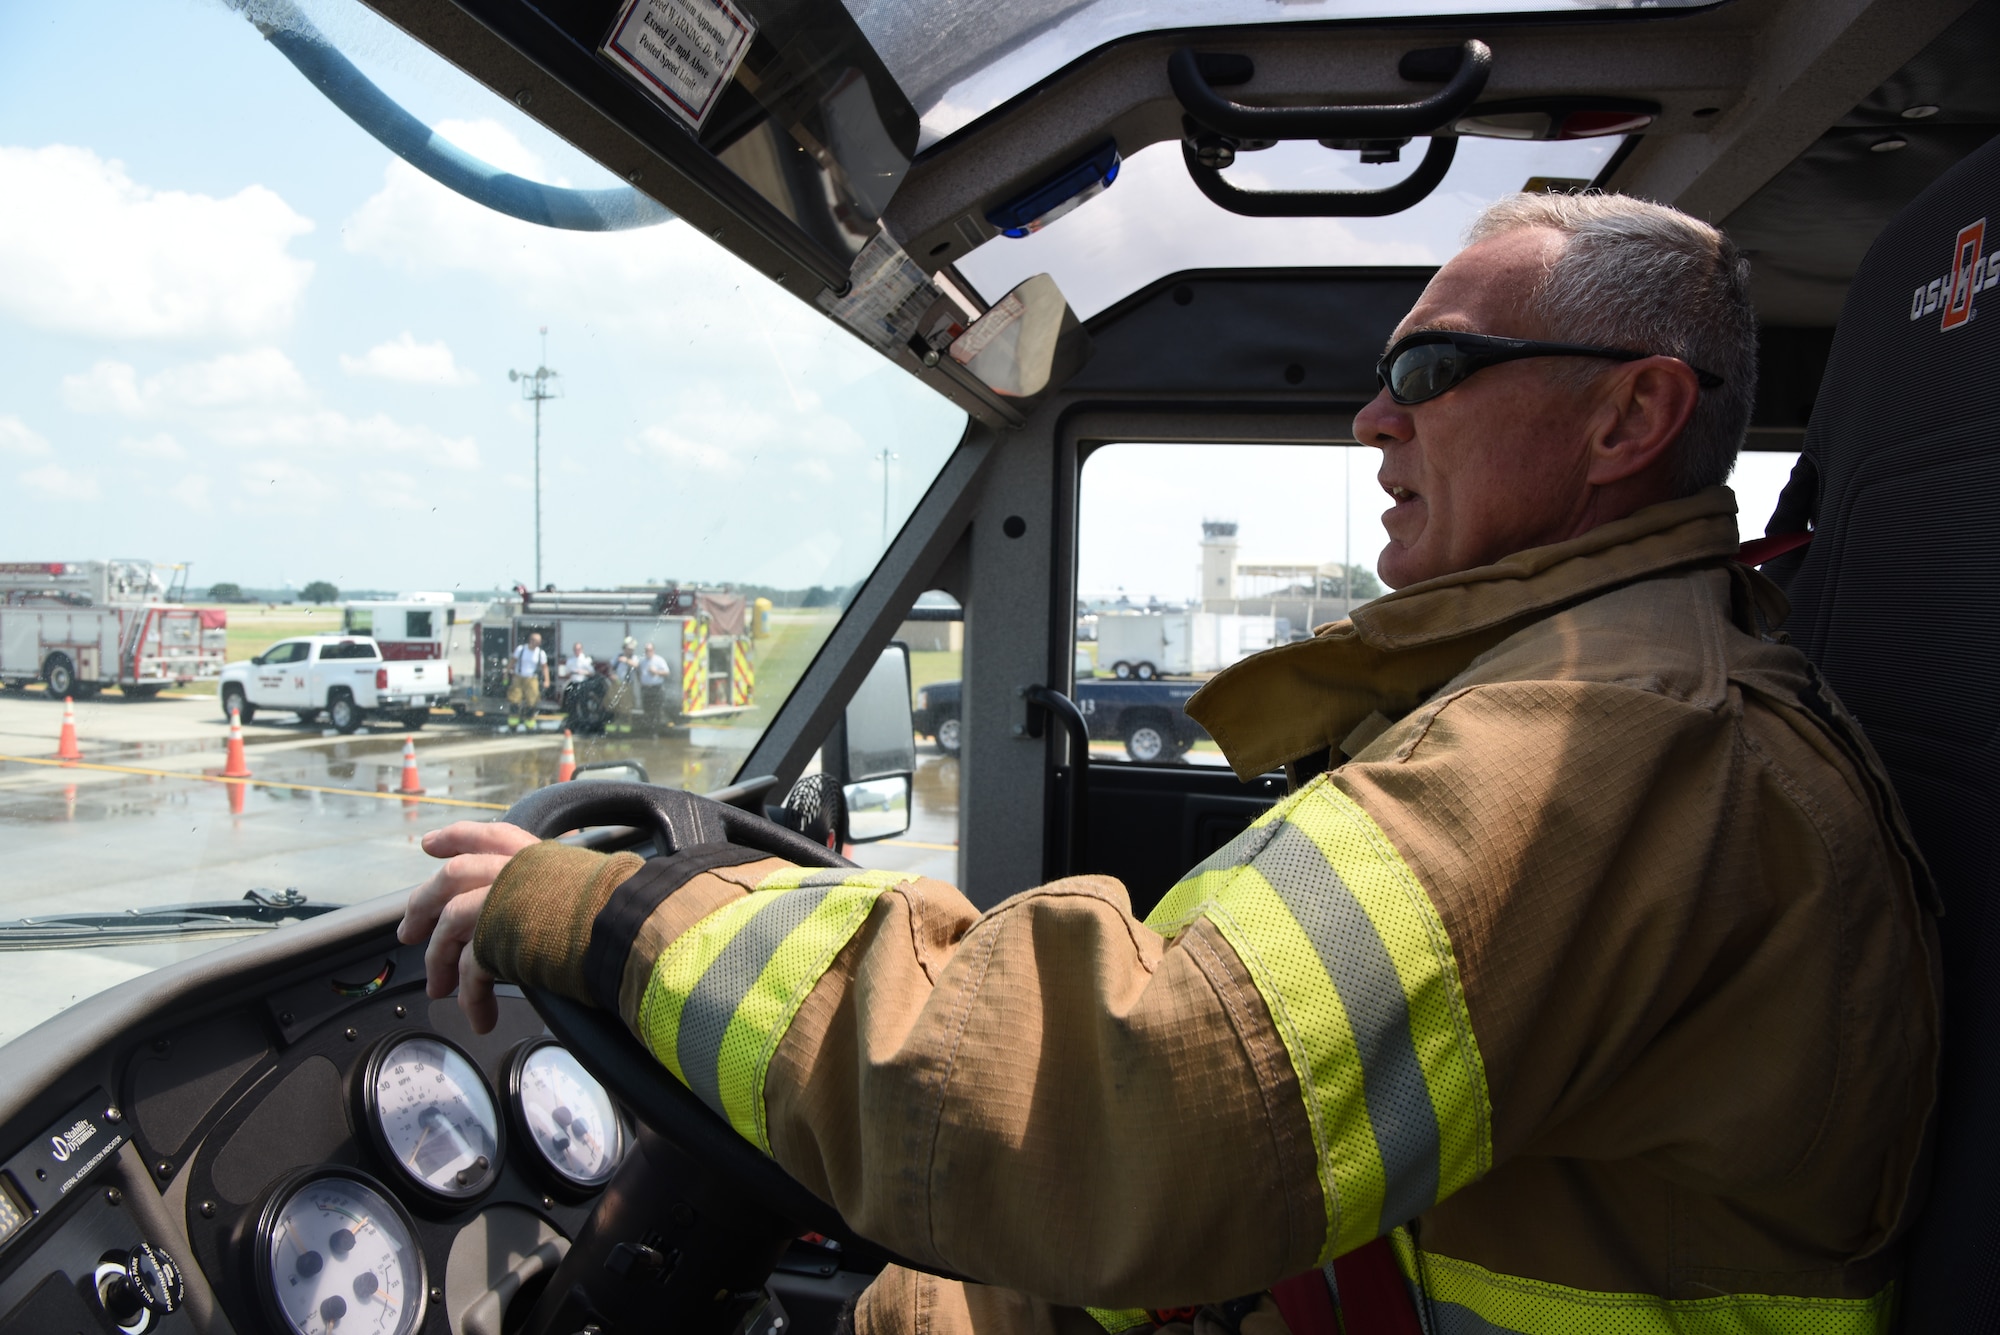 Rusty Bell, 81st Infrastructure Division firefighter, operates a fire truck to extinguish a fire on a mock C-123 training device during an aircraft rescue fire fighting training on Keesler Air Force Base, Mississippi, June 4, 2019. The joint agency training allowed the Keesler Fire Department, Gulfport Combat Readiness Training Center Fire Department, Stennis Airport Fire Department and the U.S. Naval Air Station Pensacola Gulf Coast Fire Rescue to meet the semi-annual training requirement to practice aircraft rescue and live fire training evolutions. (U.S. Air Force photo by Kemberly Groue)